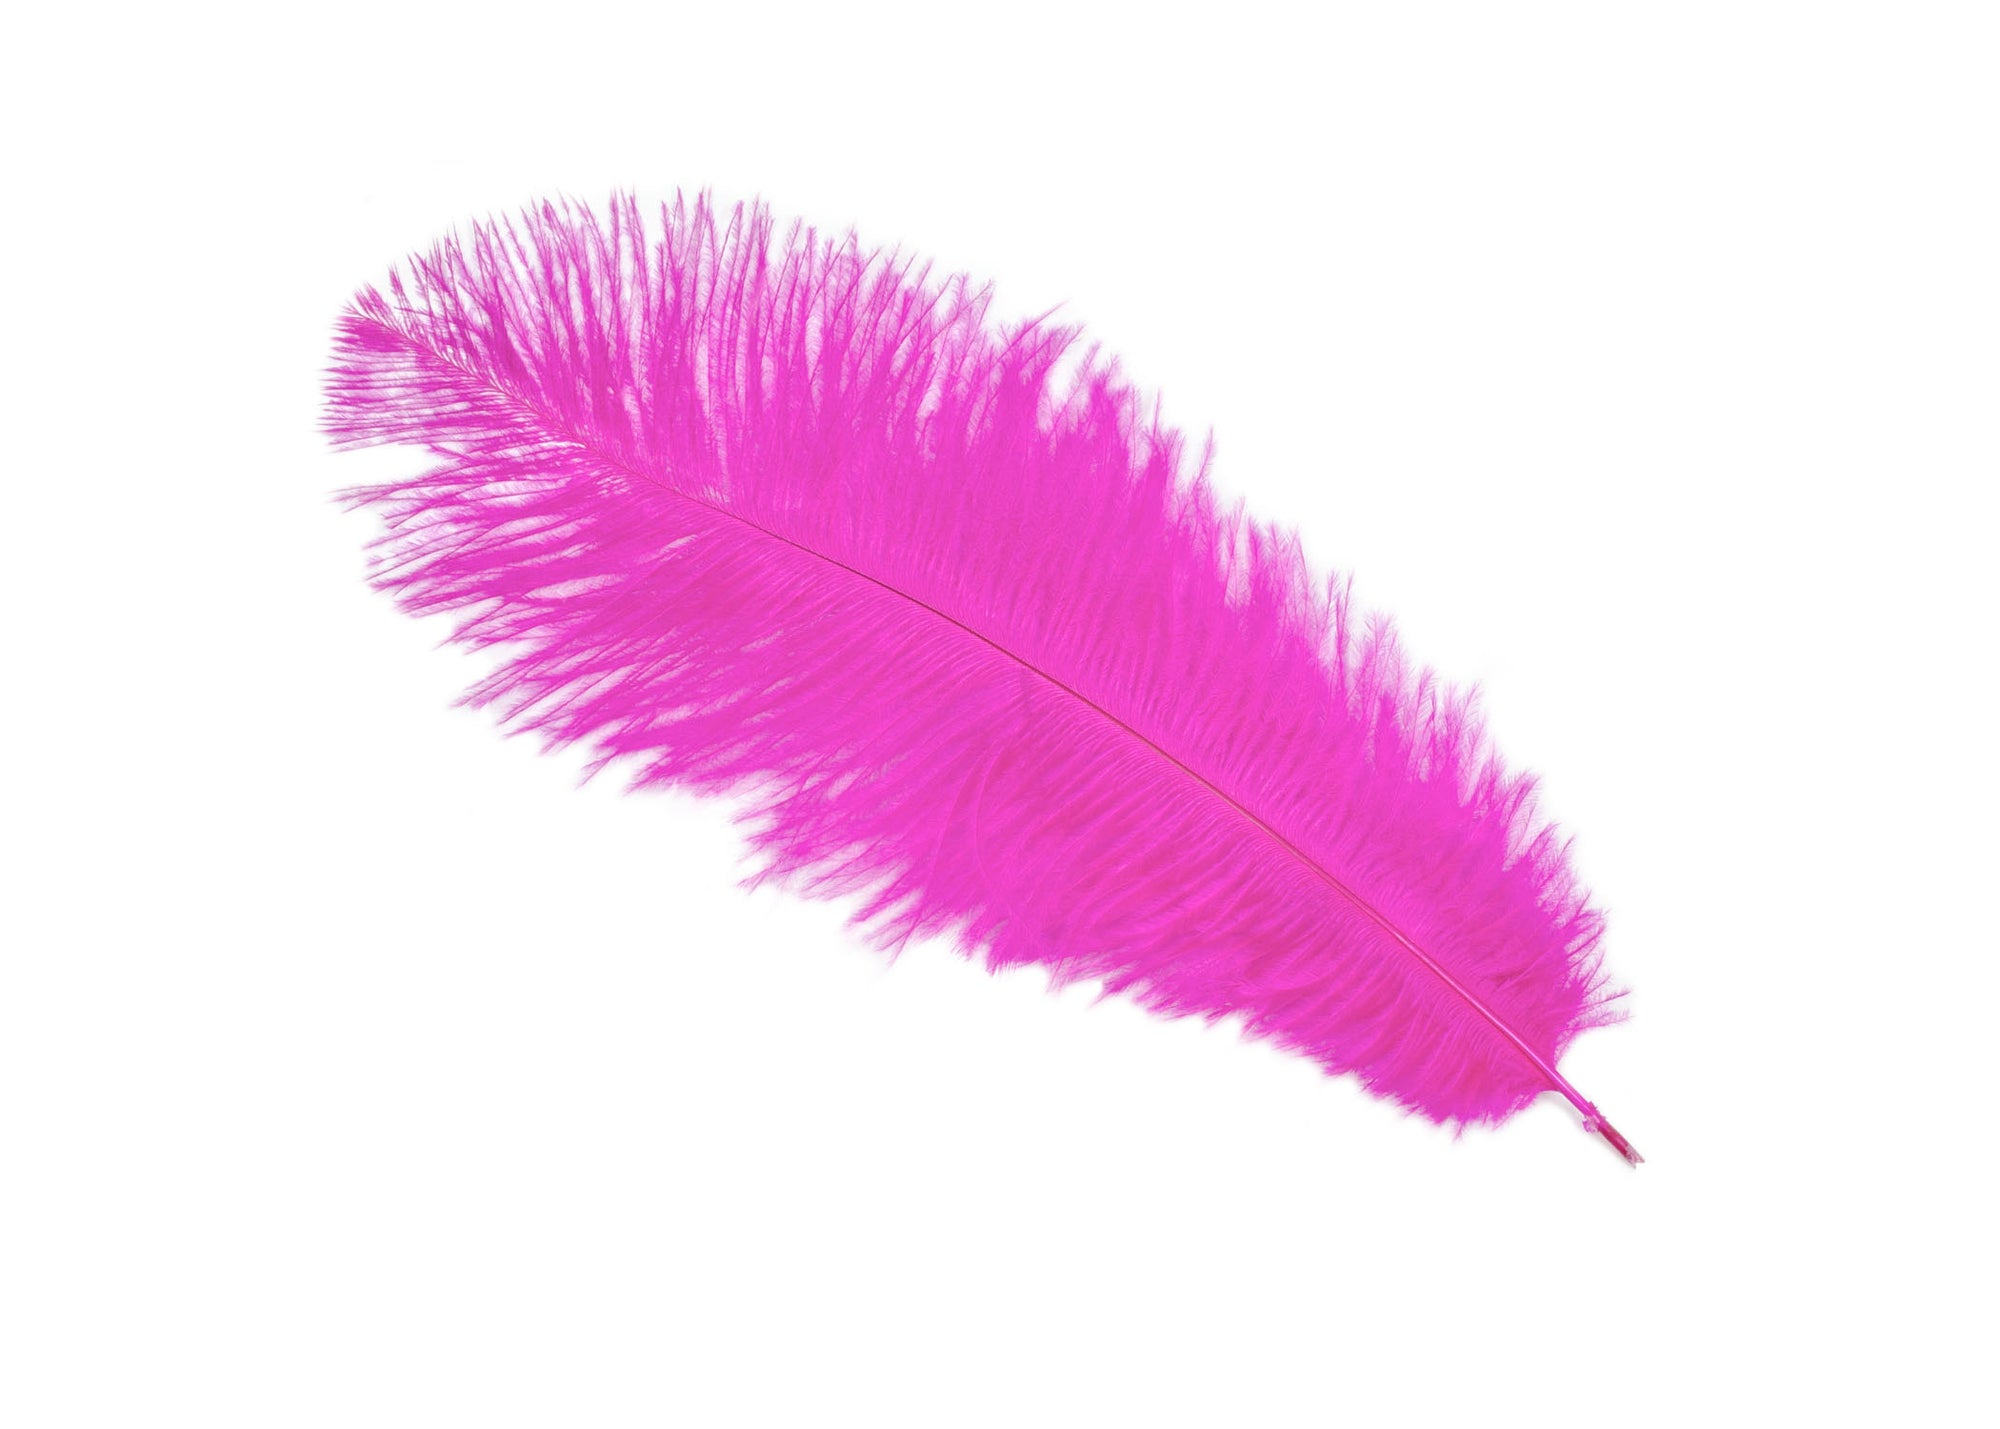 Large Ostrich Feathers - 20-25 Prime Femina Plumes - Burgundy